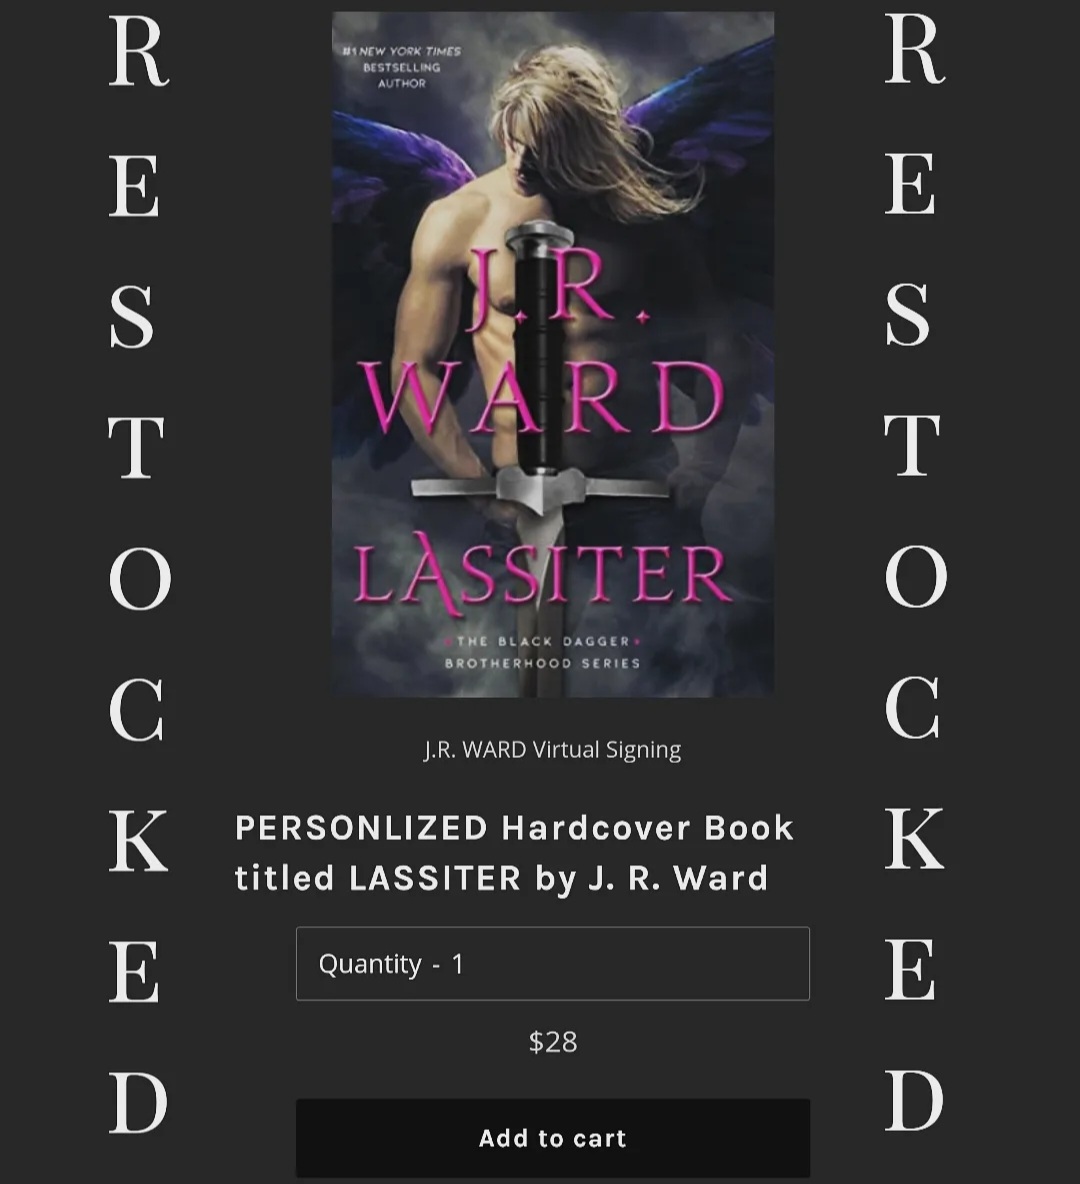 The LAST 500 copies of @JRWard1 's Lassiter VS are now available!⚔️😁 Get yours before they're gone⚔️ Ships April 11th 💜 jrwardvs.com #blackdaggerbrotherhood #jrwardauthor #paranormalromance  #newbook #vampireseries